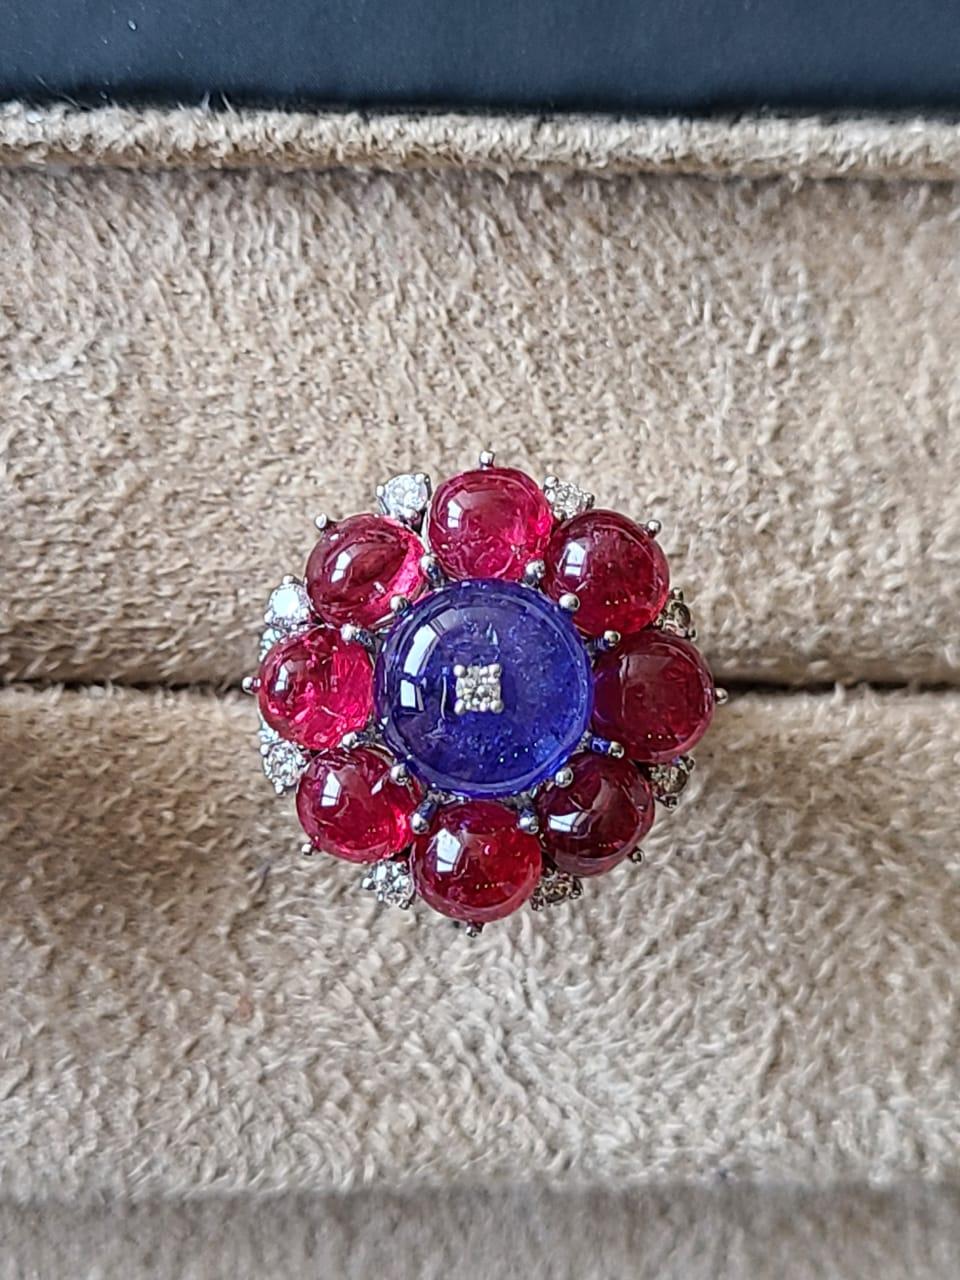 A very cute and dainty, art deco style Spinel and Tanzanite Cocktail Ring set in 18K Gold & Diamonds. The Spinel cabochon, weighing 10.19 carats, and is completely natural without any treatment. The weight of the Tanzanite cabochons is 27.01 carats